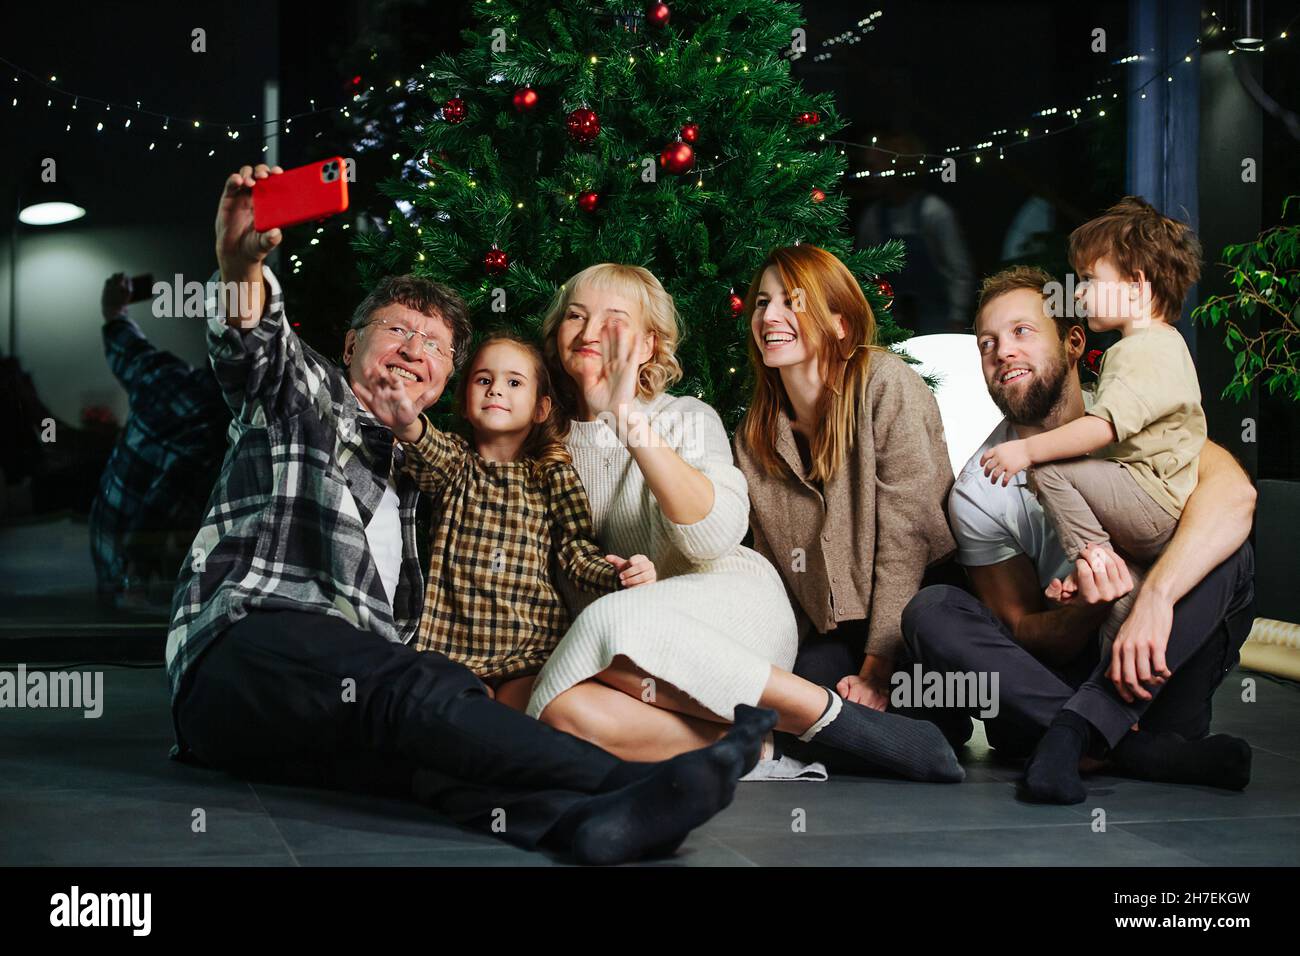 Sitting on the floor big family posing for a christmas selfie. Children, parents and grandparents sitting in front of a decorated christmas tree. Stock Photo